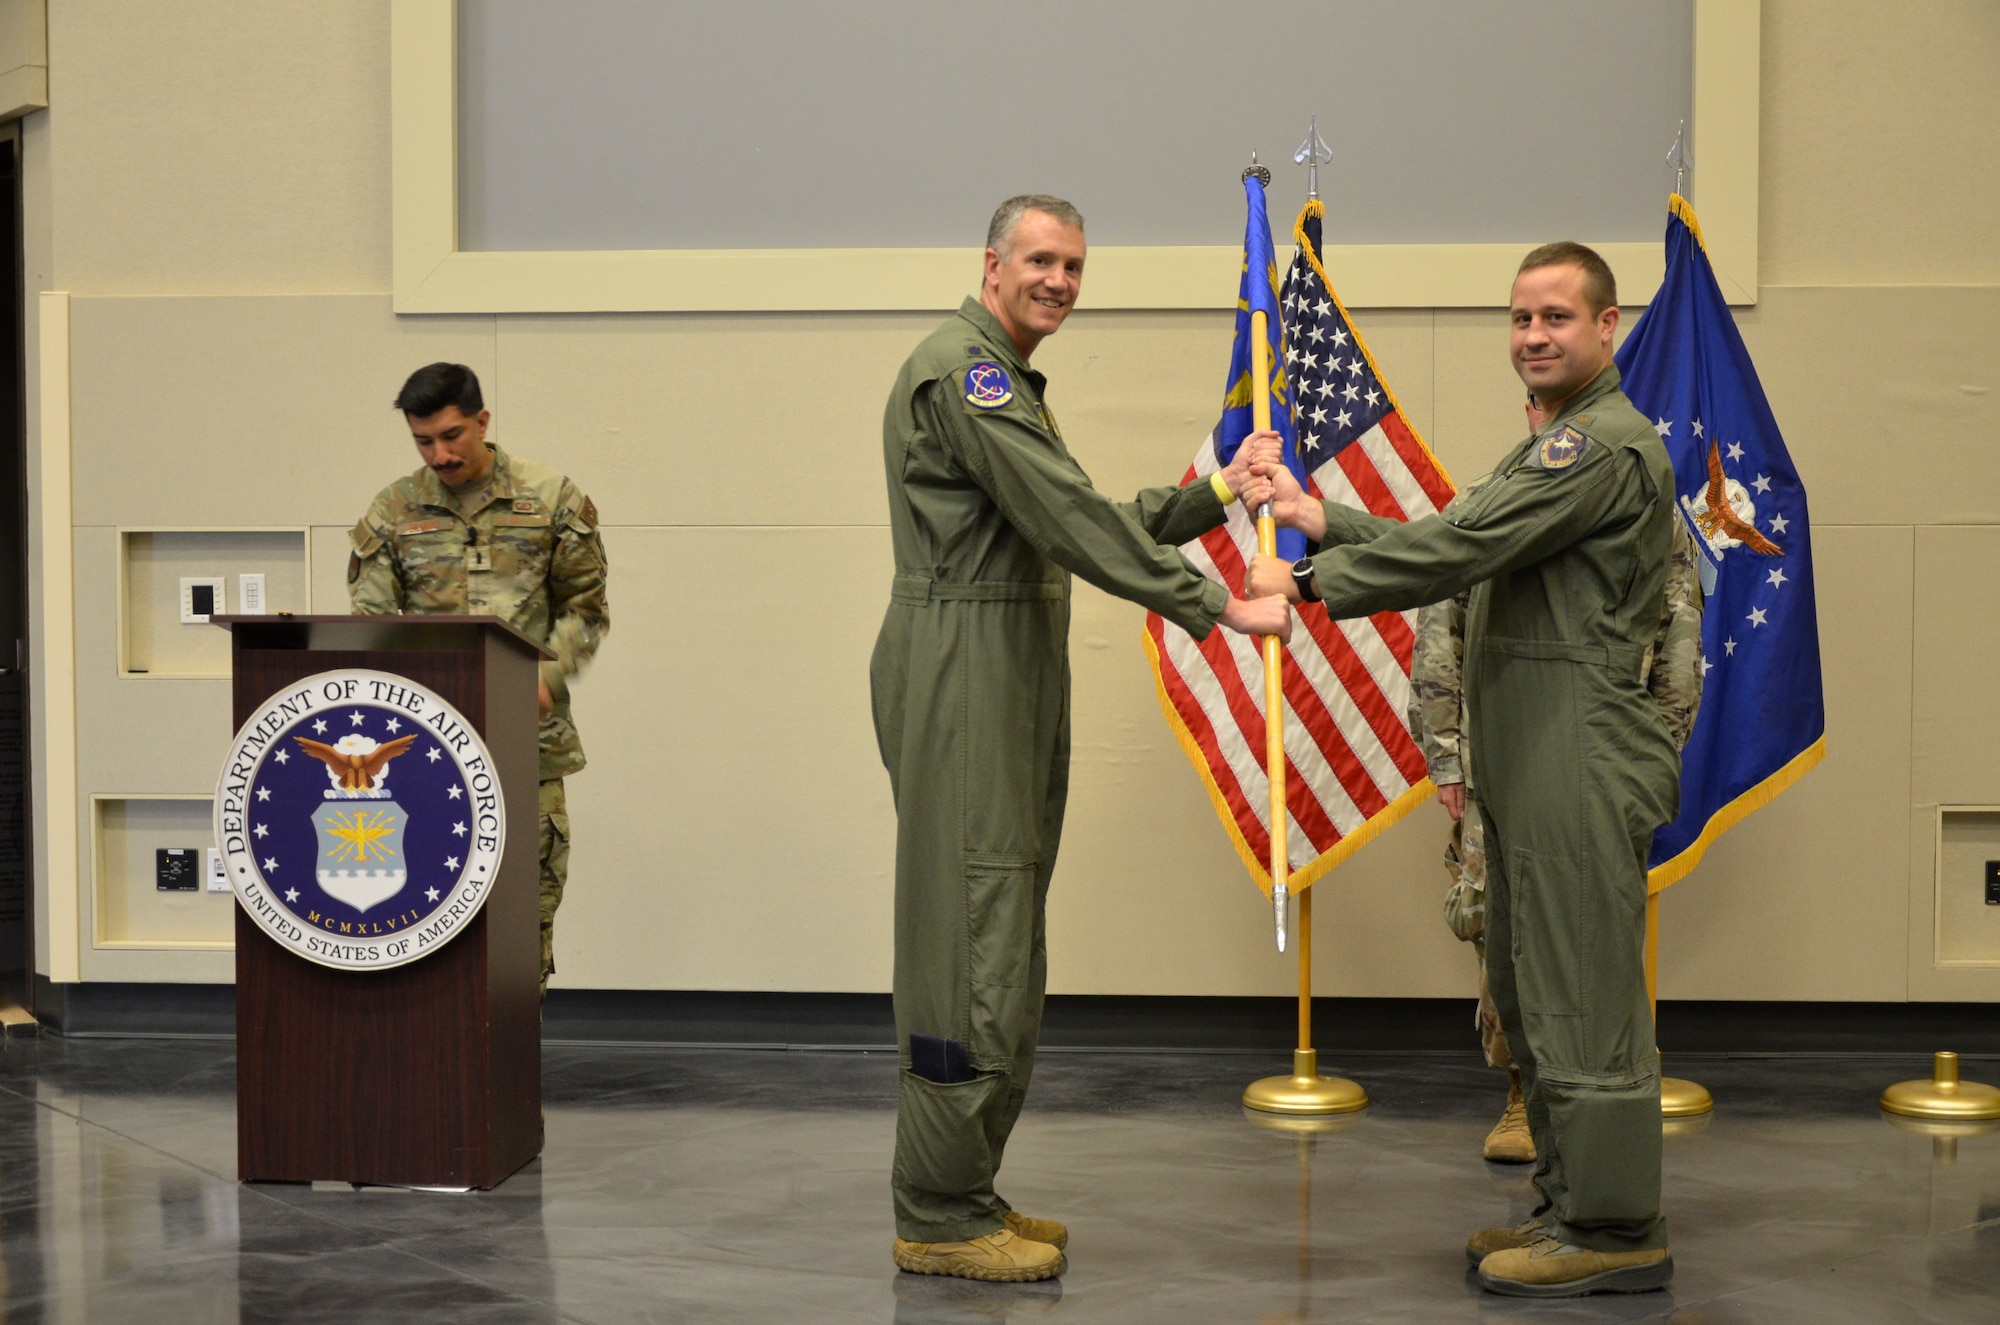 Lt. Col. Alex Wolfard, then-commander of the 586th Flight Test Squadron at Holloman Air Force Base, New Mexico, passes the 586th Flight Test Squadron, Detachment 1, guidon to Maj. Joshua Smith charging him with command of the detachment during a July 13, 2022, change of command ceremony at White Sands Missile Range, New Mexico. (U.S. Army photo by Anne Marie Chadima)